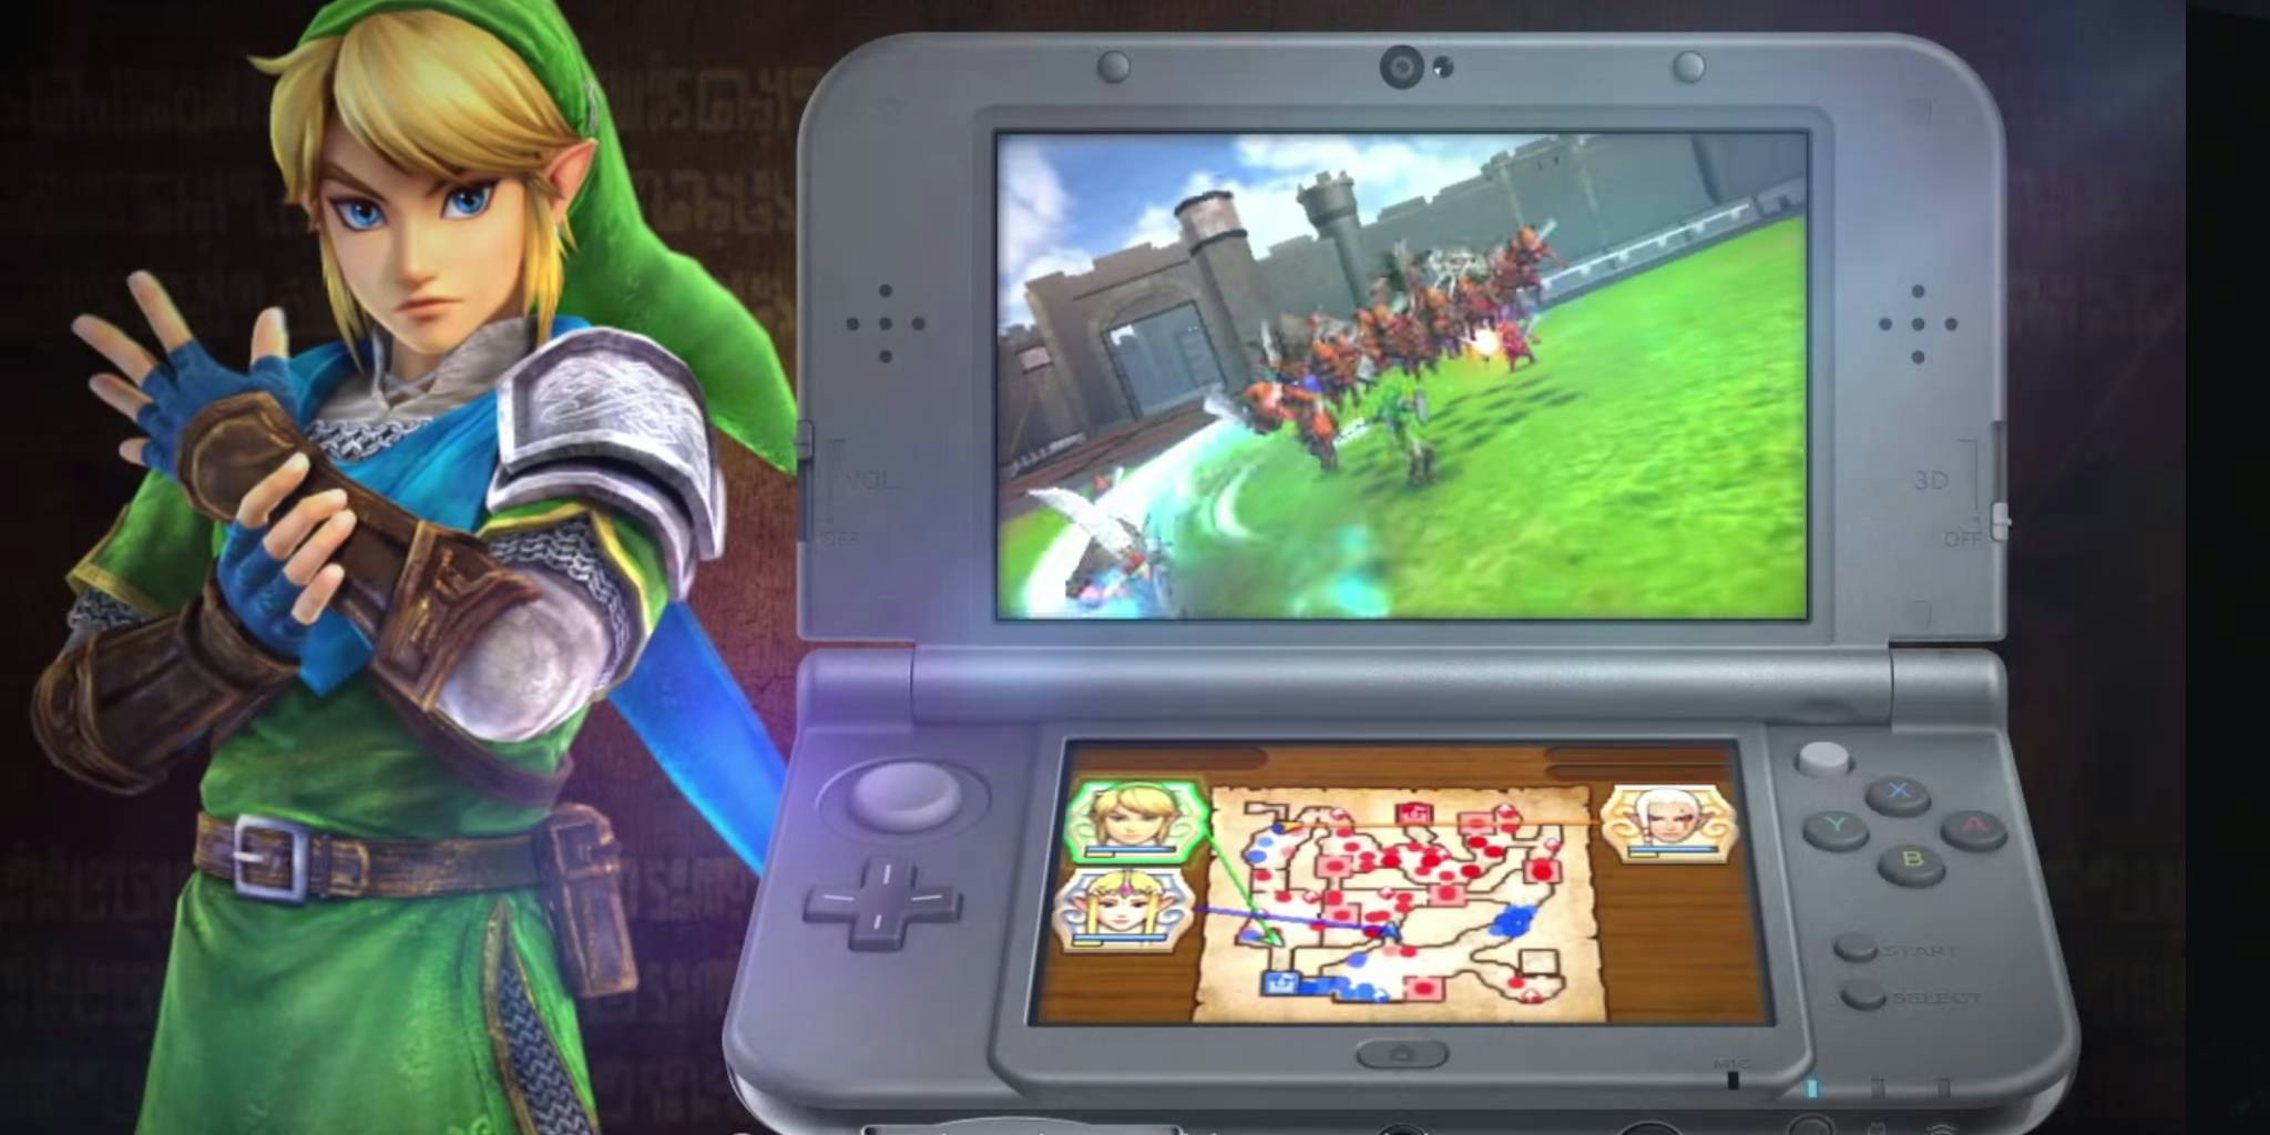 Nintendo announces two new Zelda games for 3DS as wait for the big one - The Daily Dot